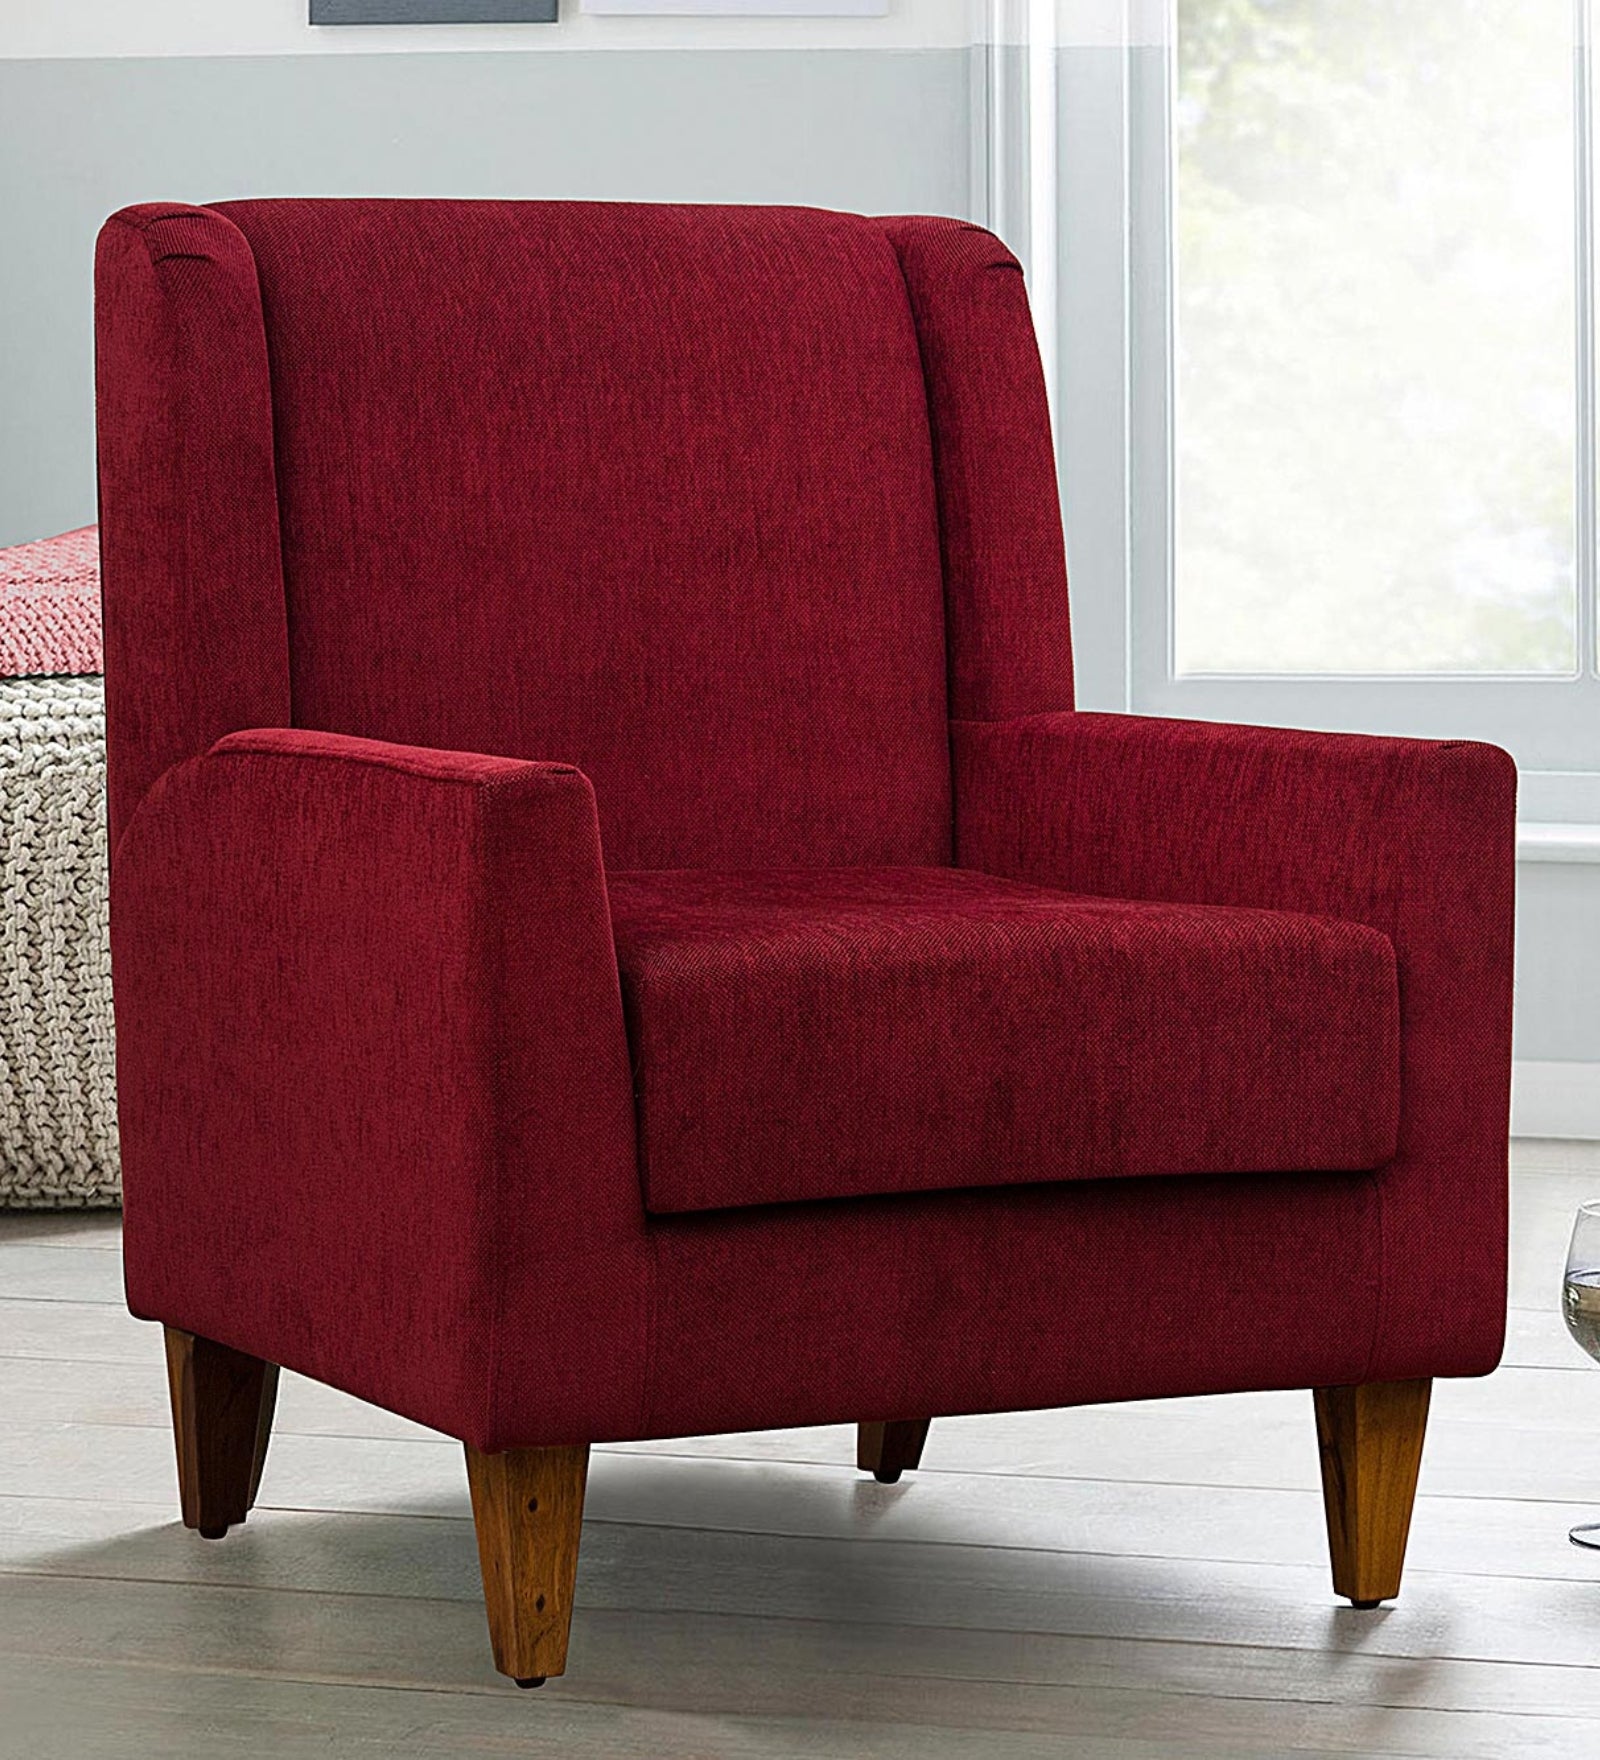 Maya Fabric Accent Chair in Blood Maroon Colour